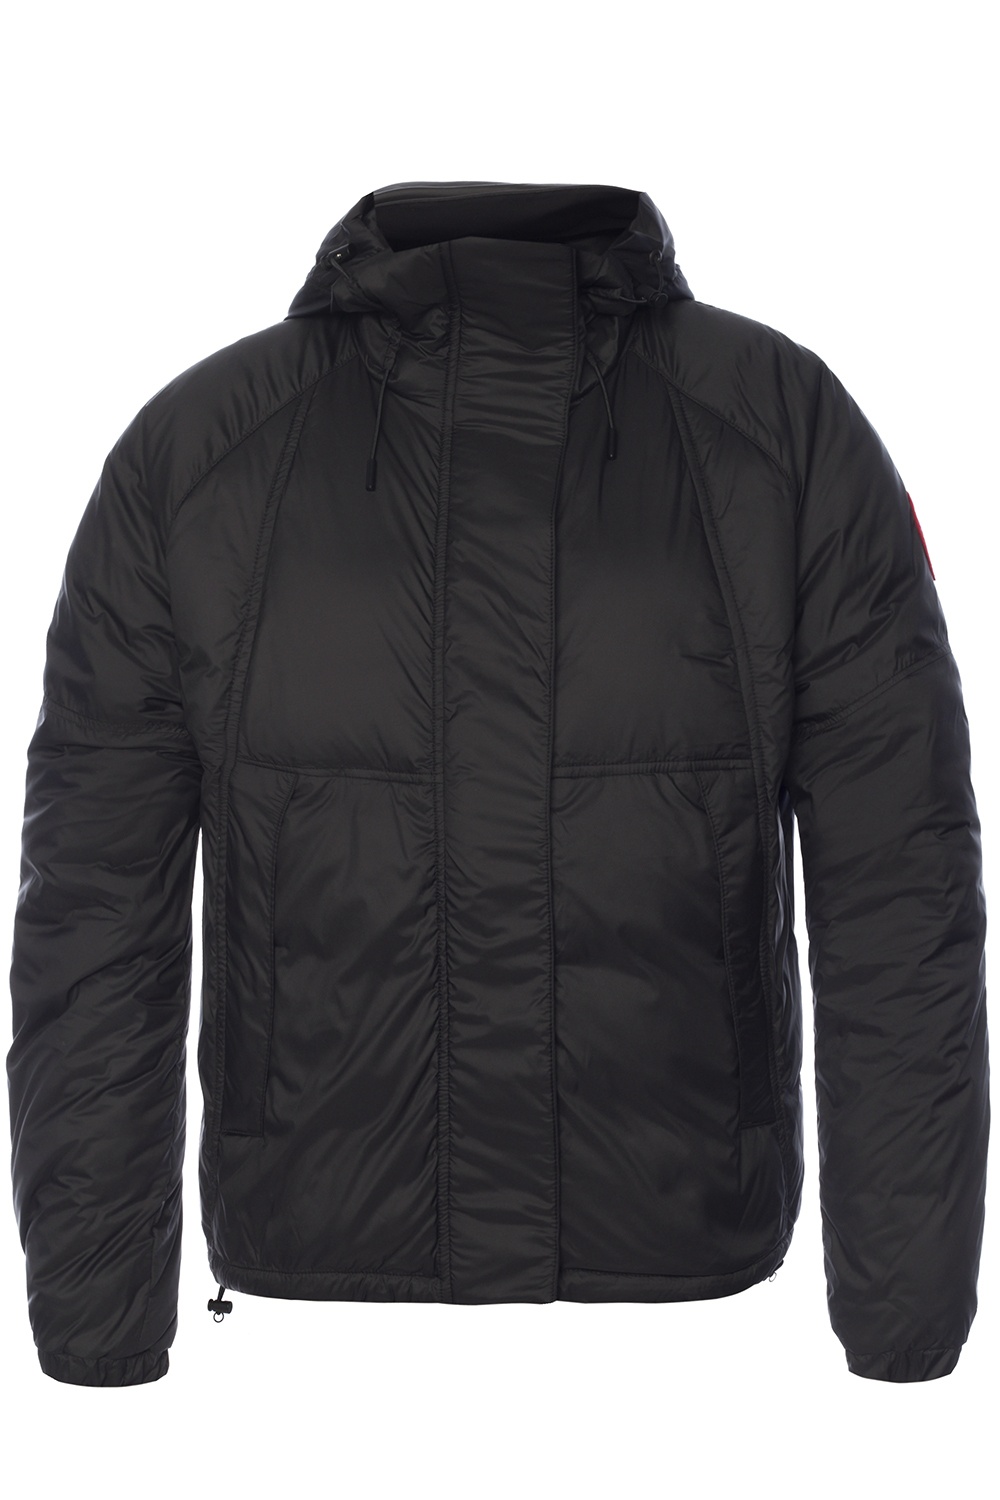 Campden' hooded down jacket Canada 